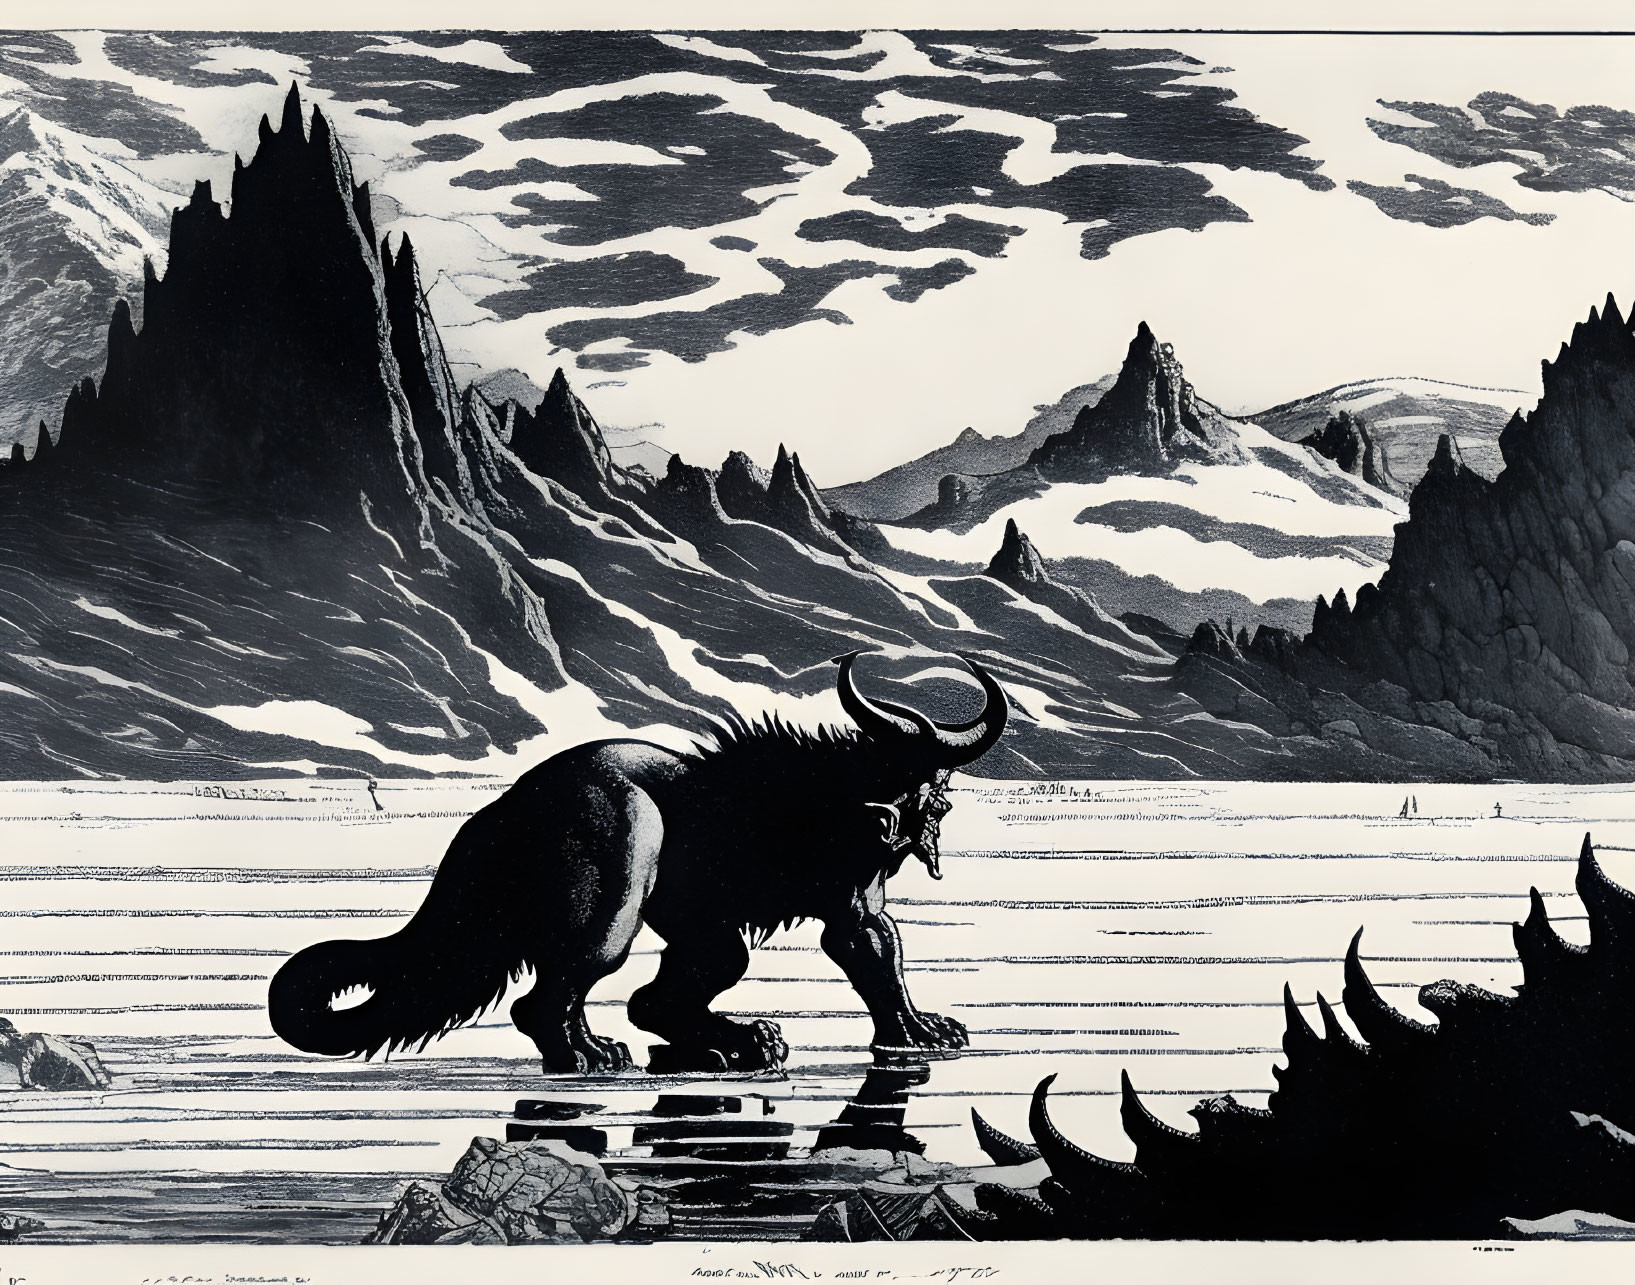 Monochrome illustration of muscular bison in mountain landscape